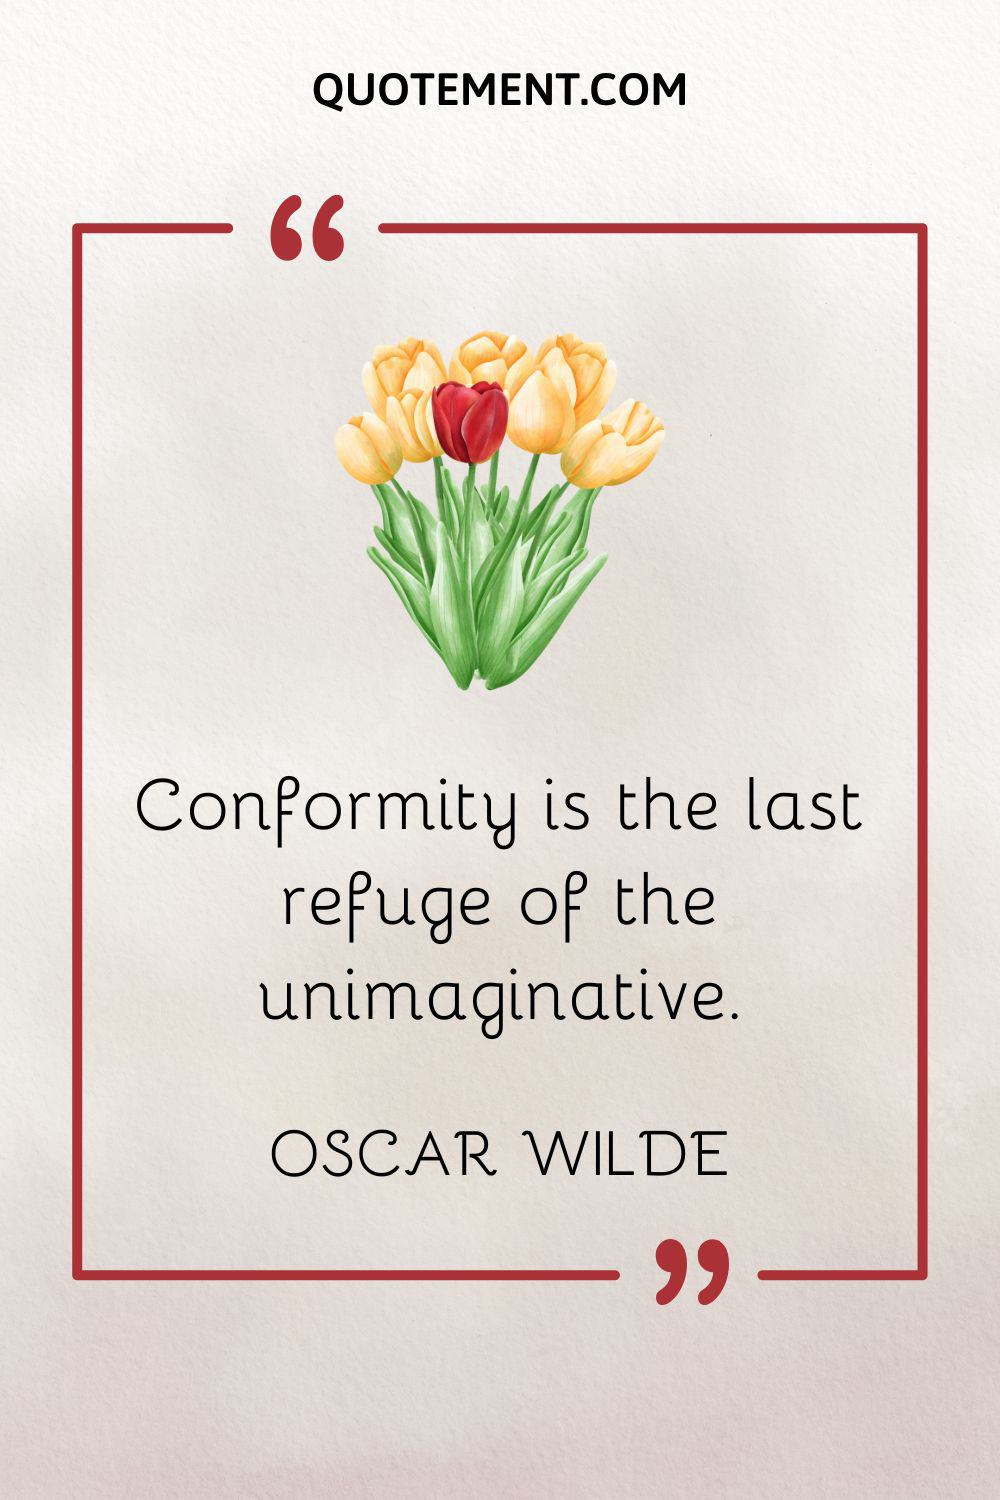 Conformity is the last refuge of the unimaginative